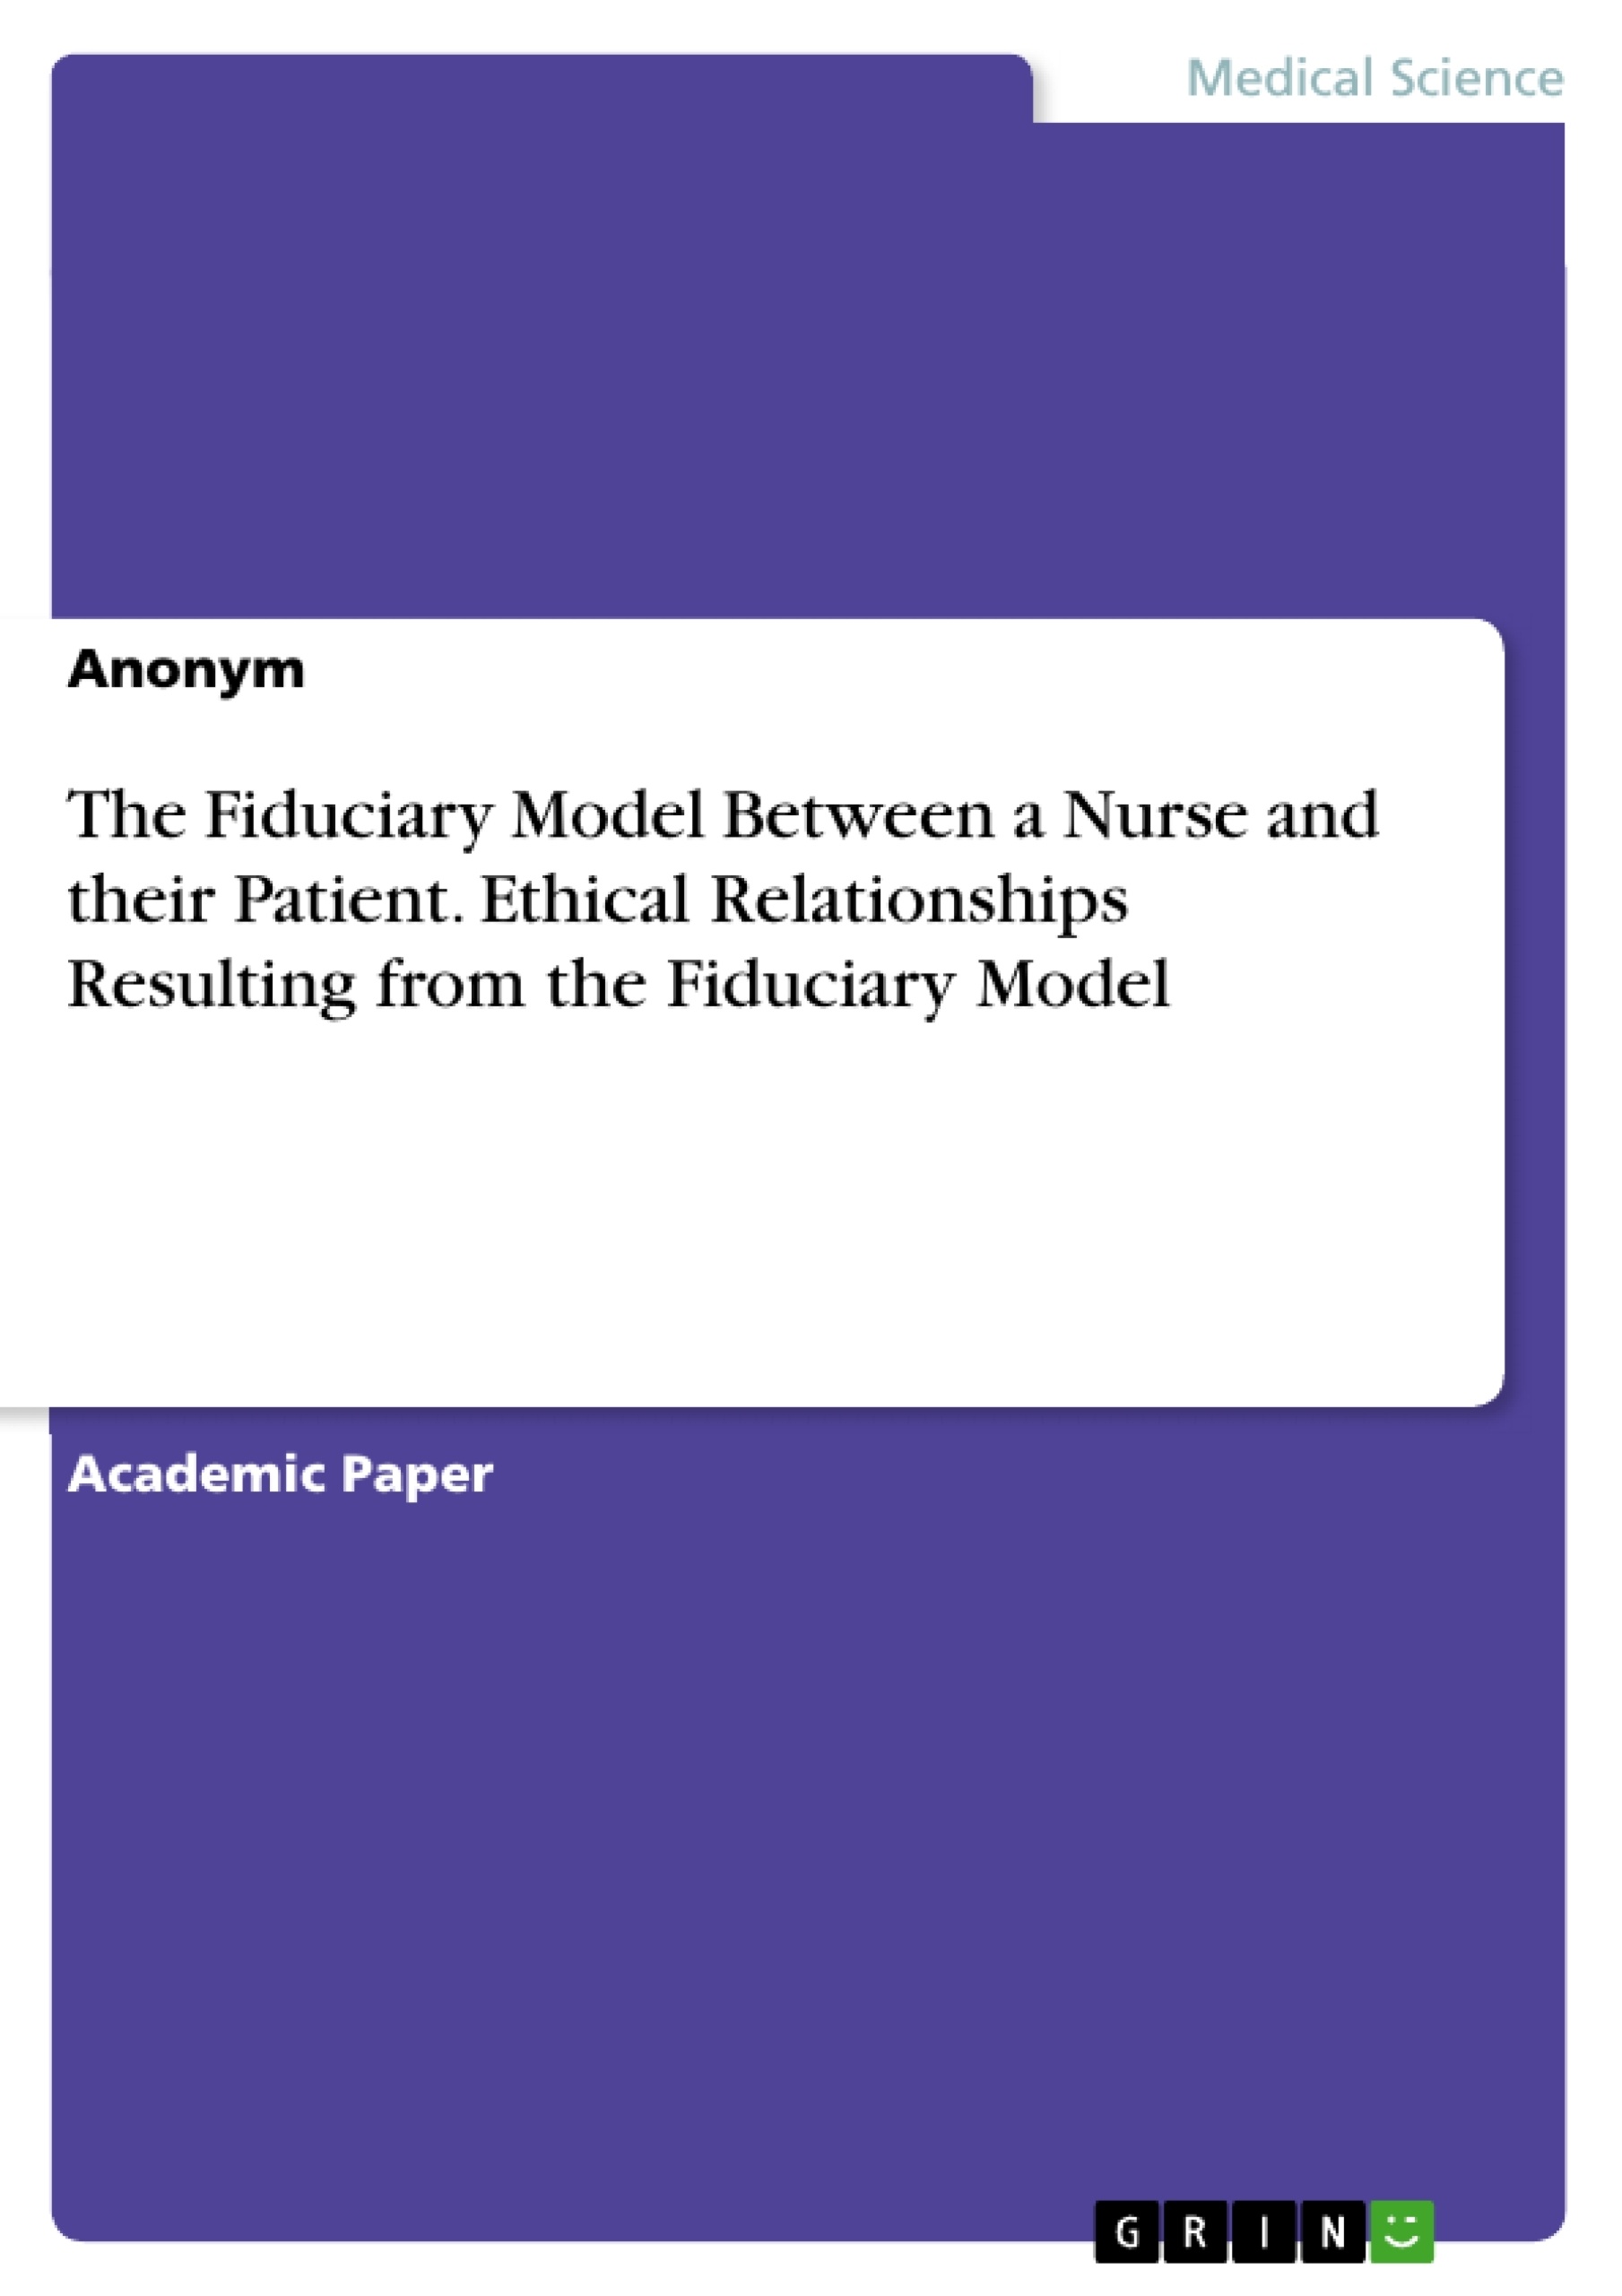 Título: The Fiduciary Model Between a Nurse and their Patient. Ethical Relationships Resulting from the Fiduciary Model